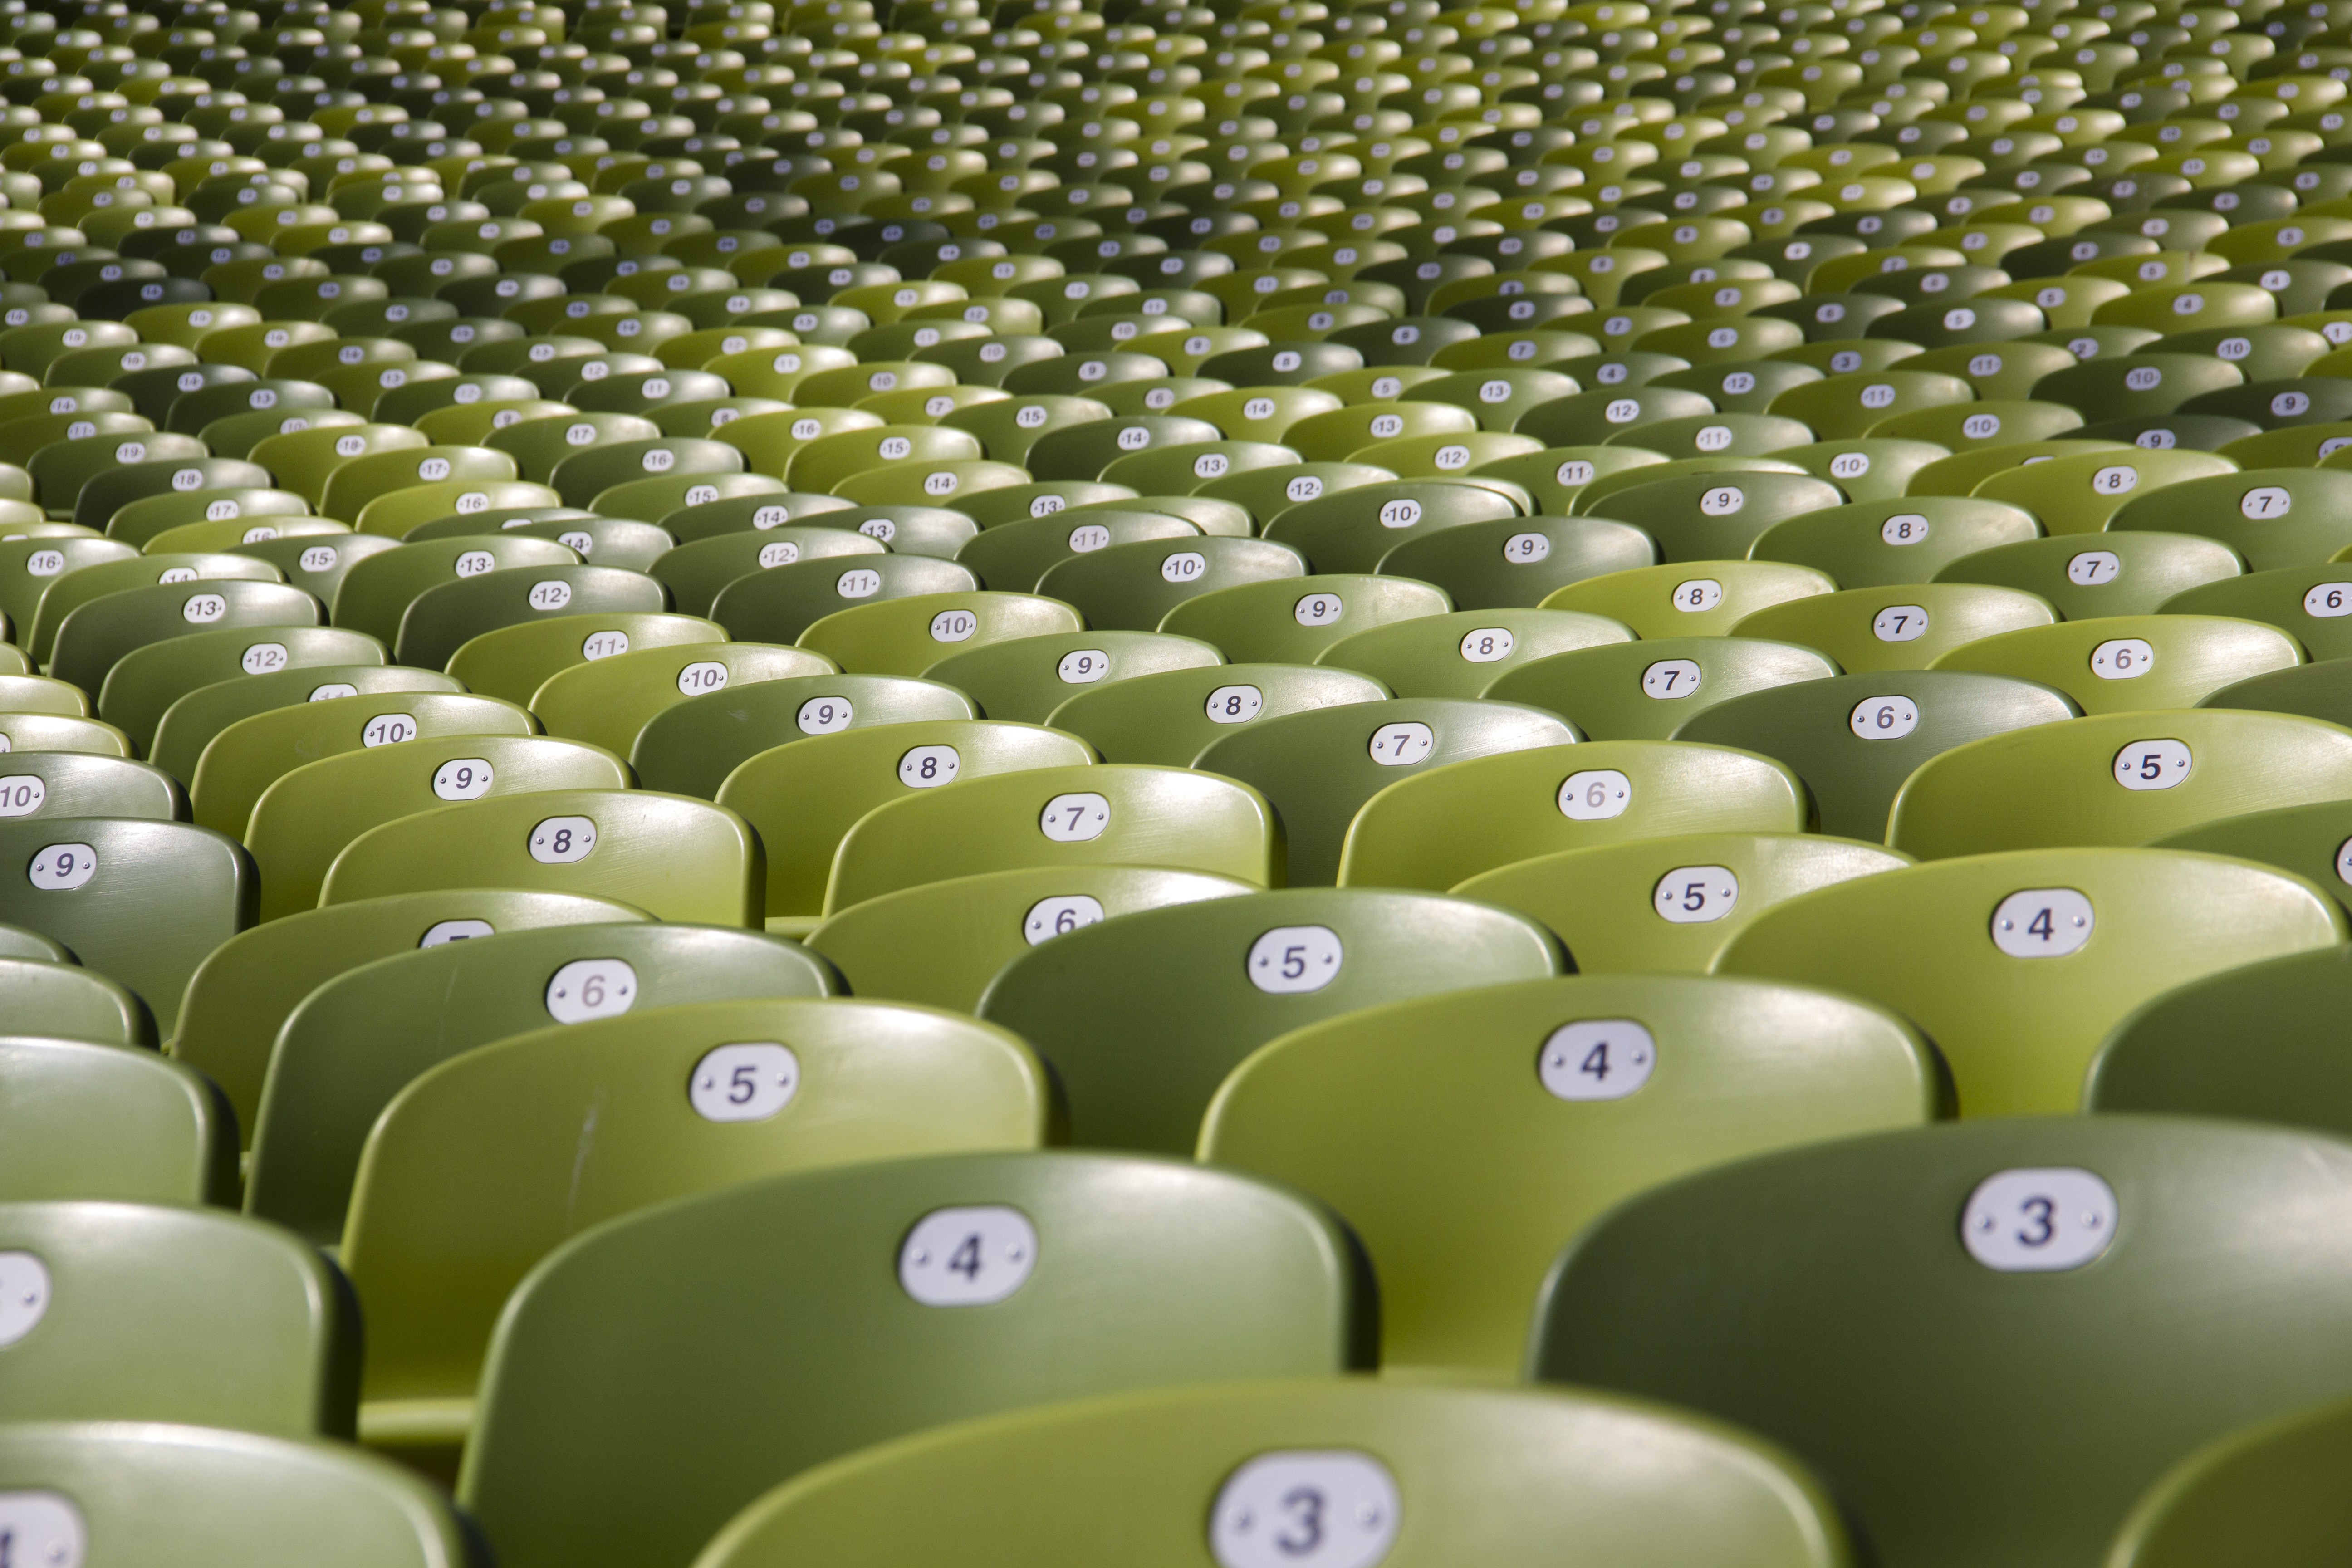 500px Photo ID: 28795857 - The seats of the Olympic Stadion in Munich.